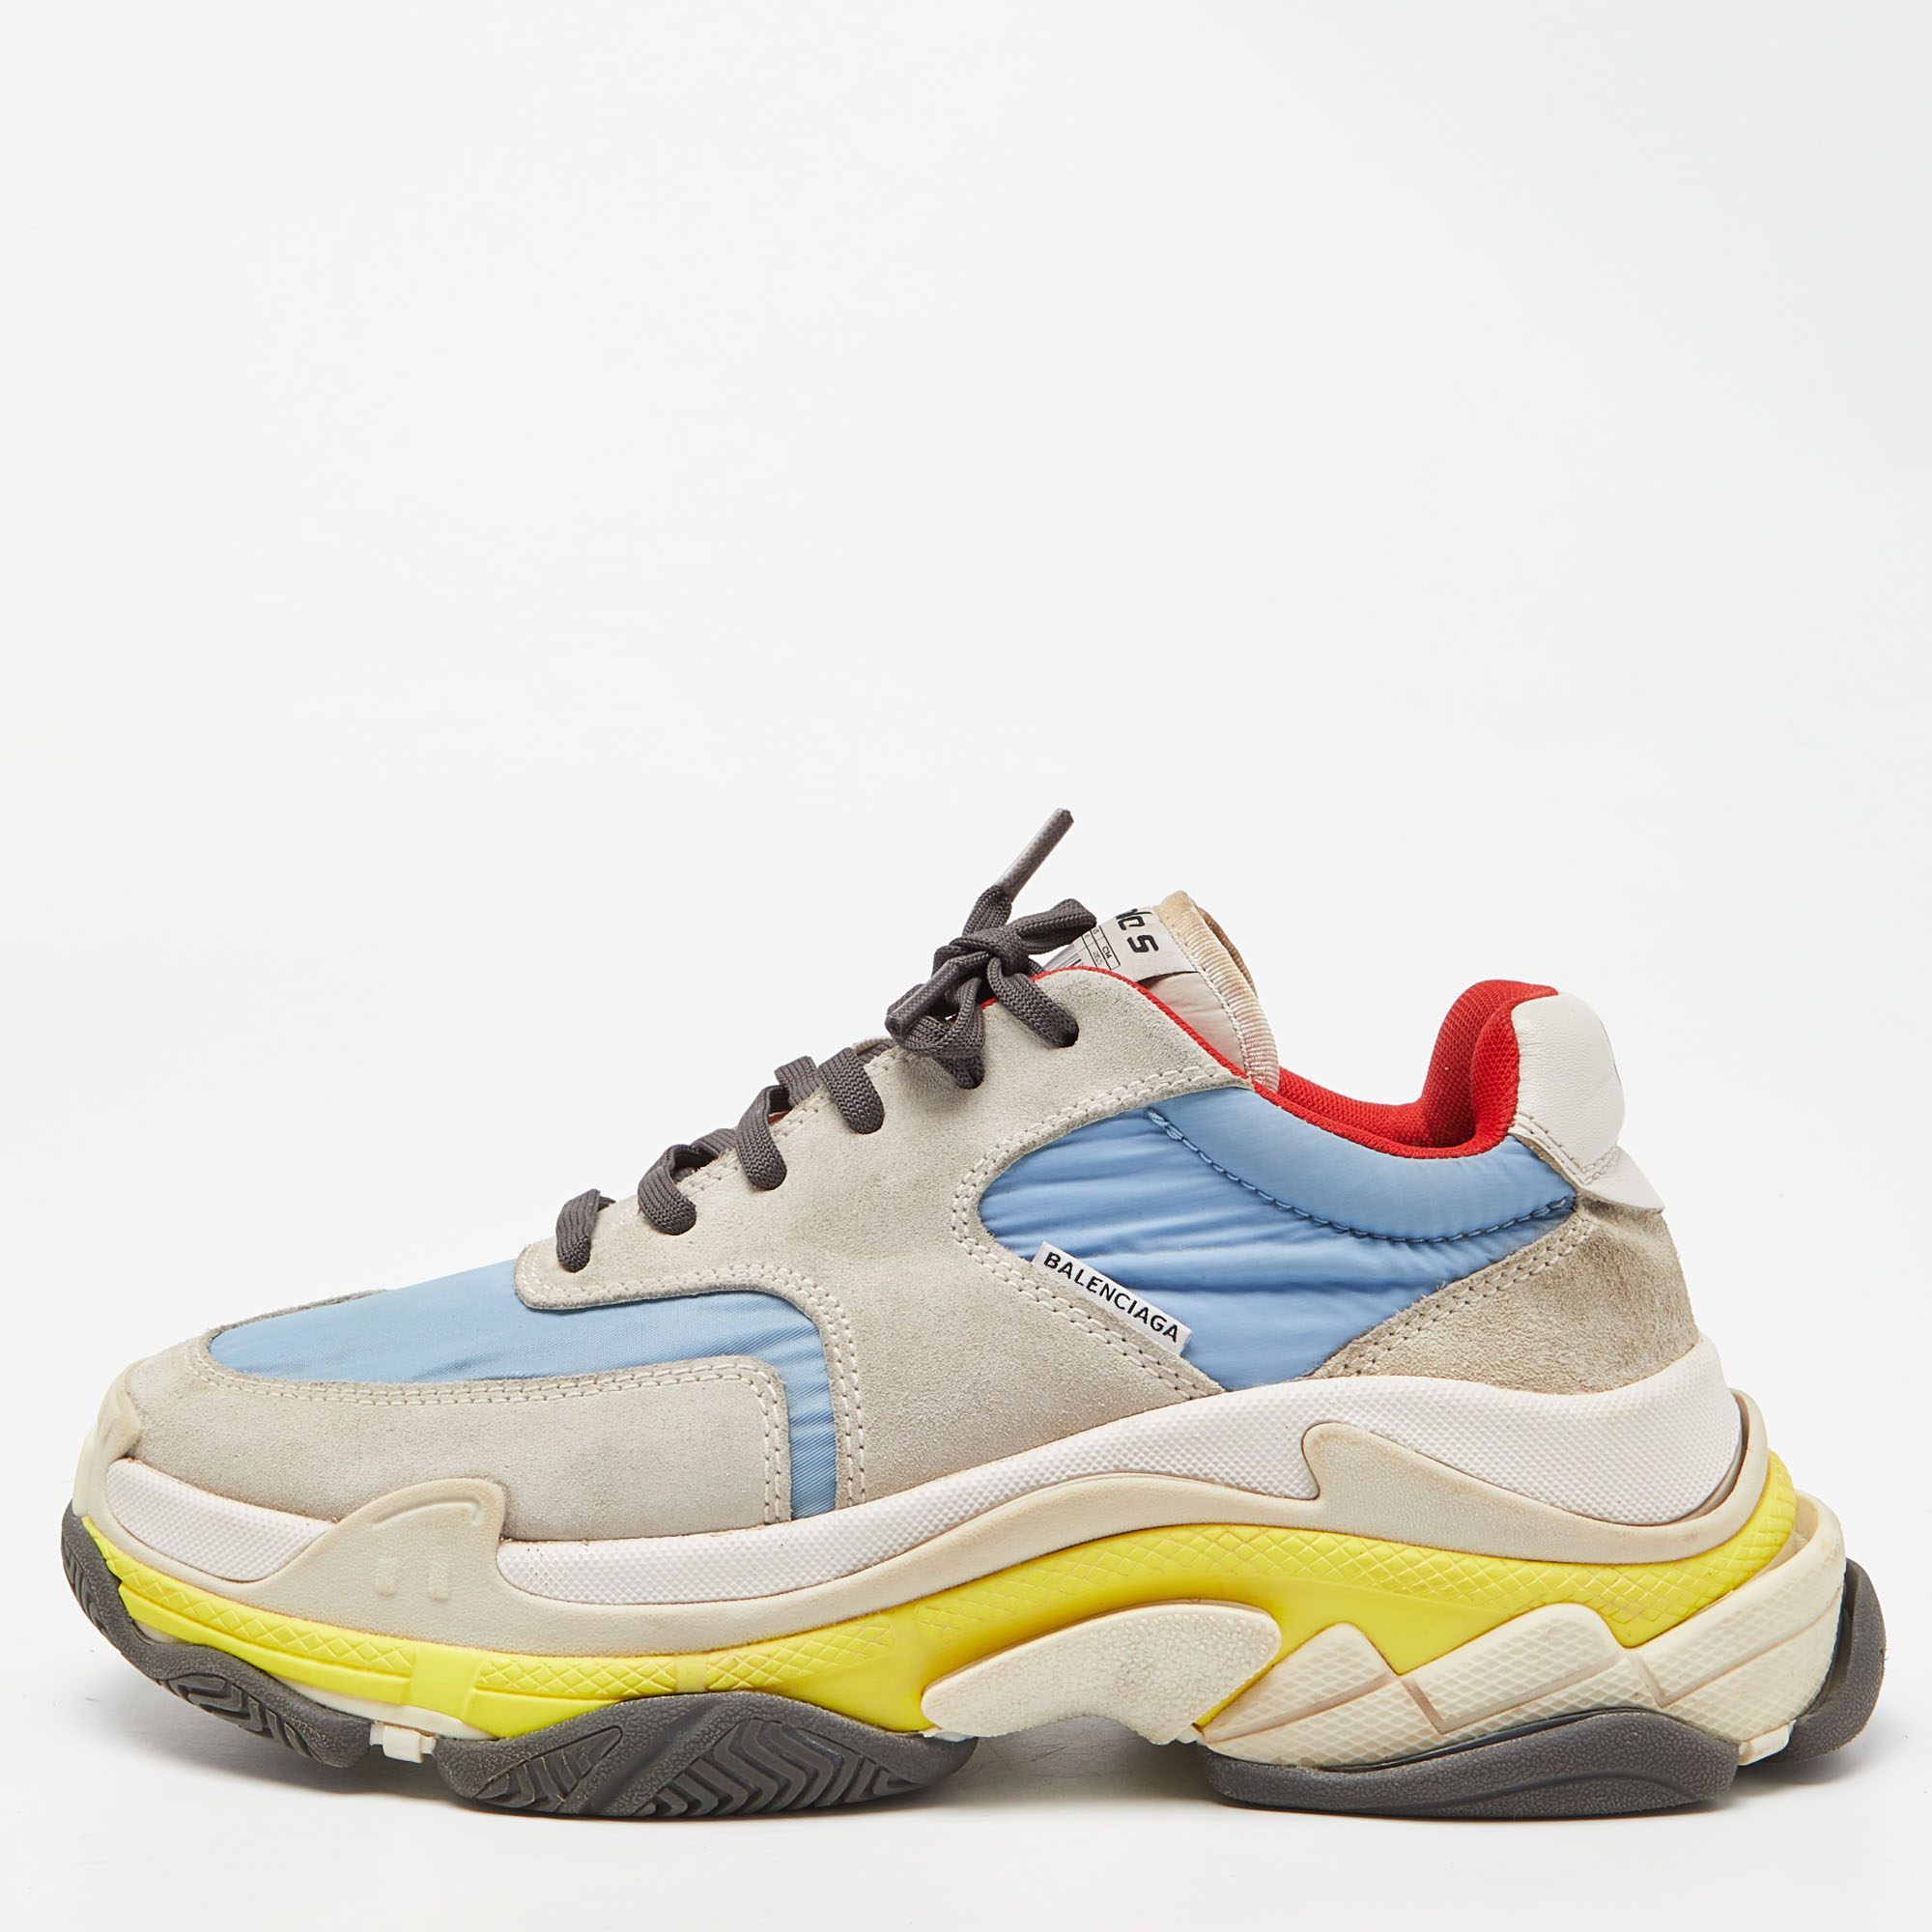 Pre-owned Balenciaga Multicolor Nylon And Suede Triple S Trainers Size 40